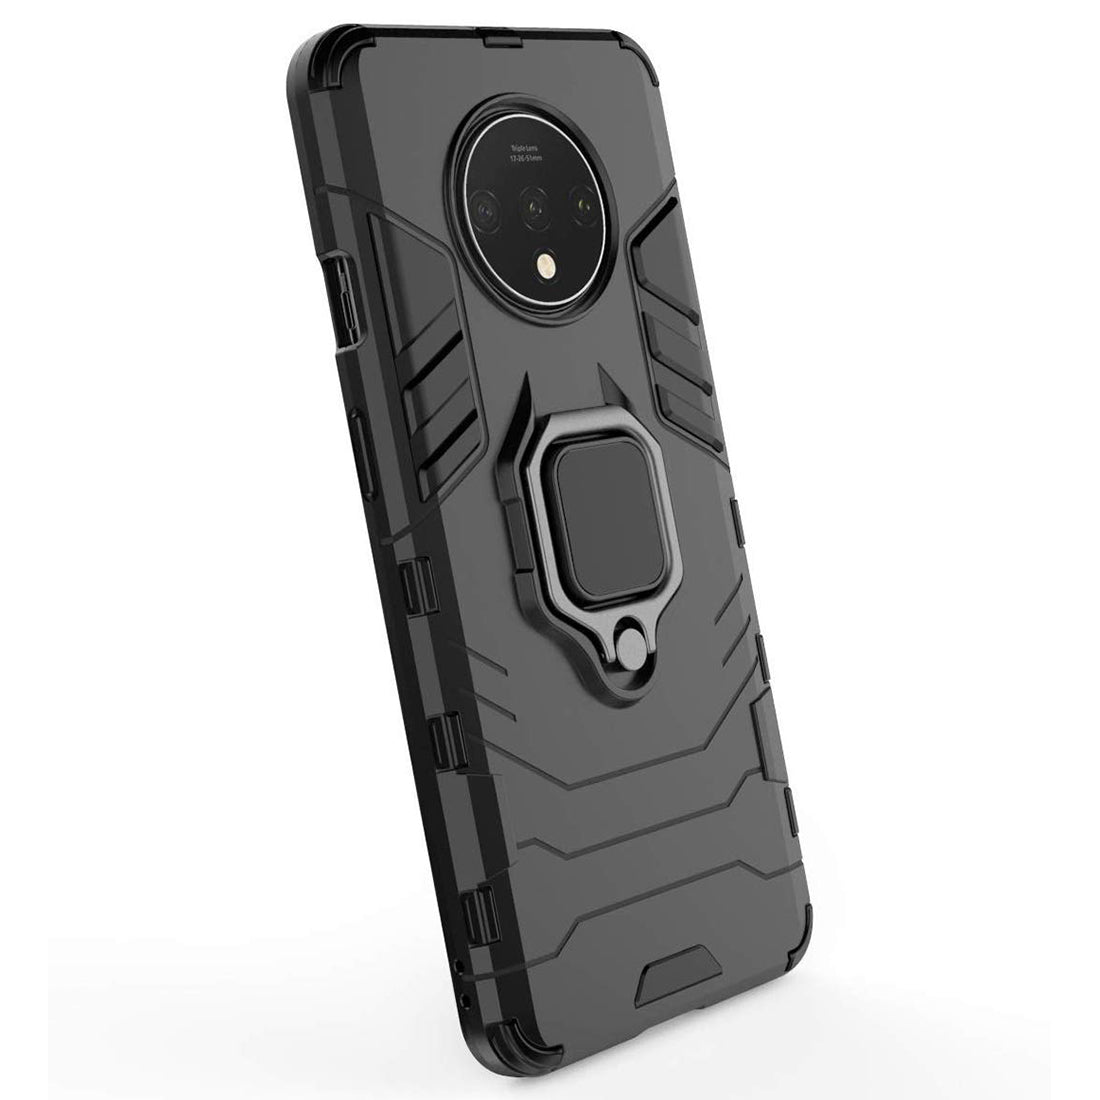 Hybrid Rugged Armor Kickstand Case for OnePlus 7T